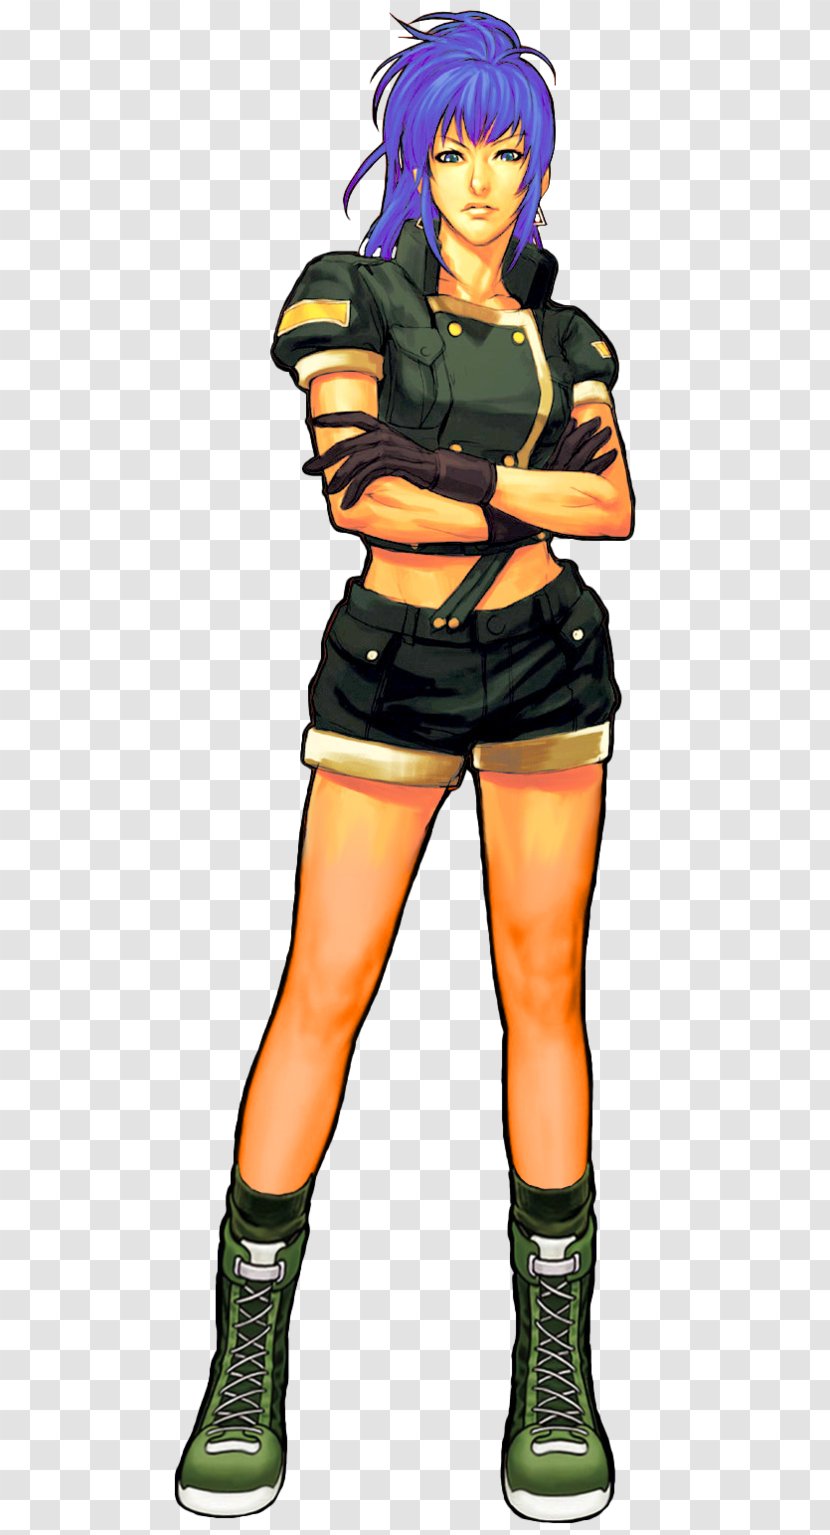 The King Of Fighters '96 2002 Iori Yagami Leona Heidern - Frame Transparent PNG